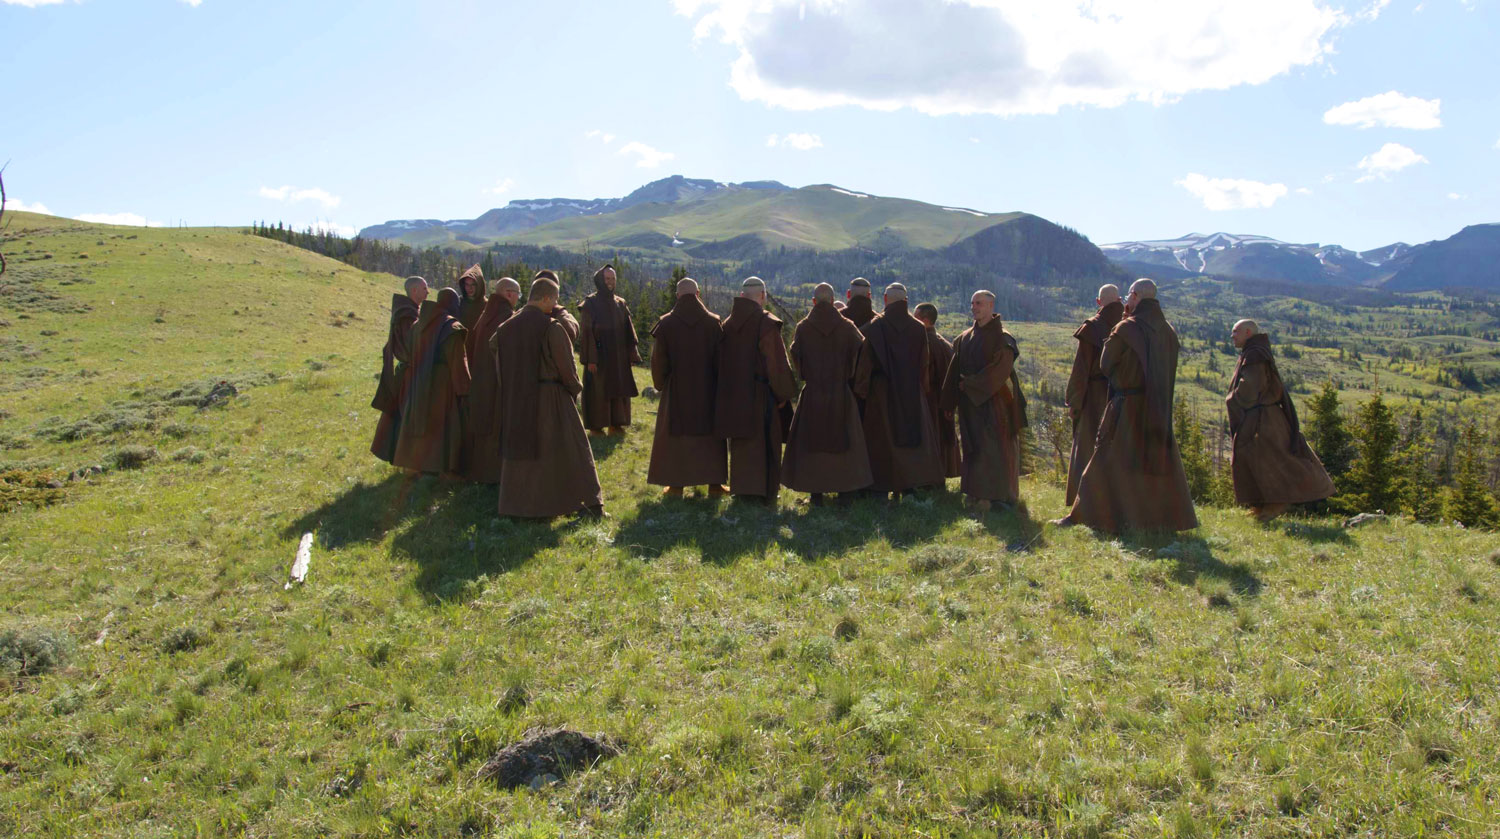 Monks enjoying each other's company in the mountains.